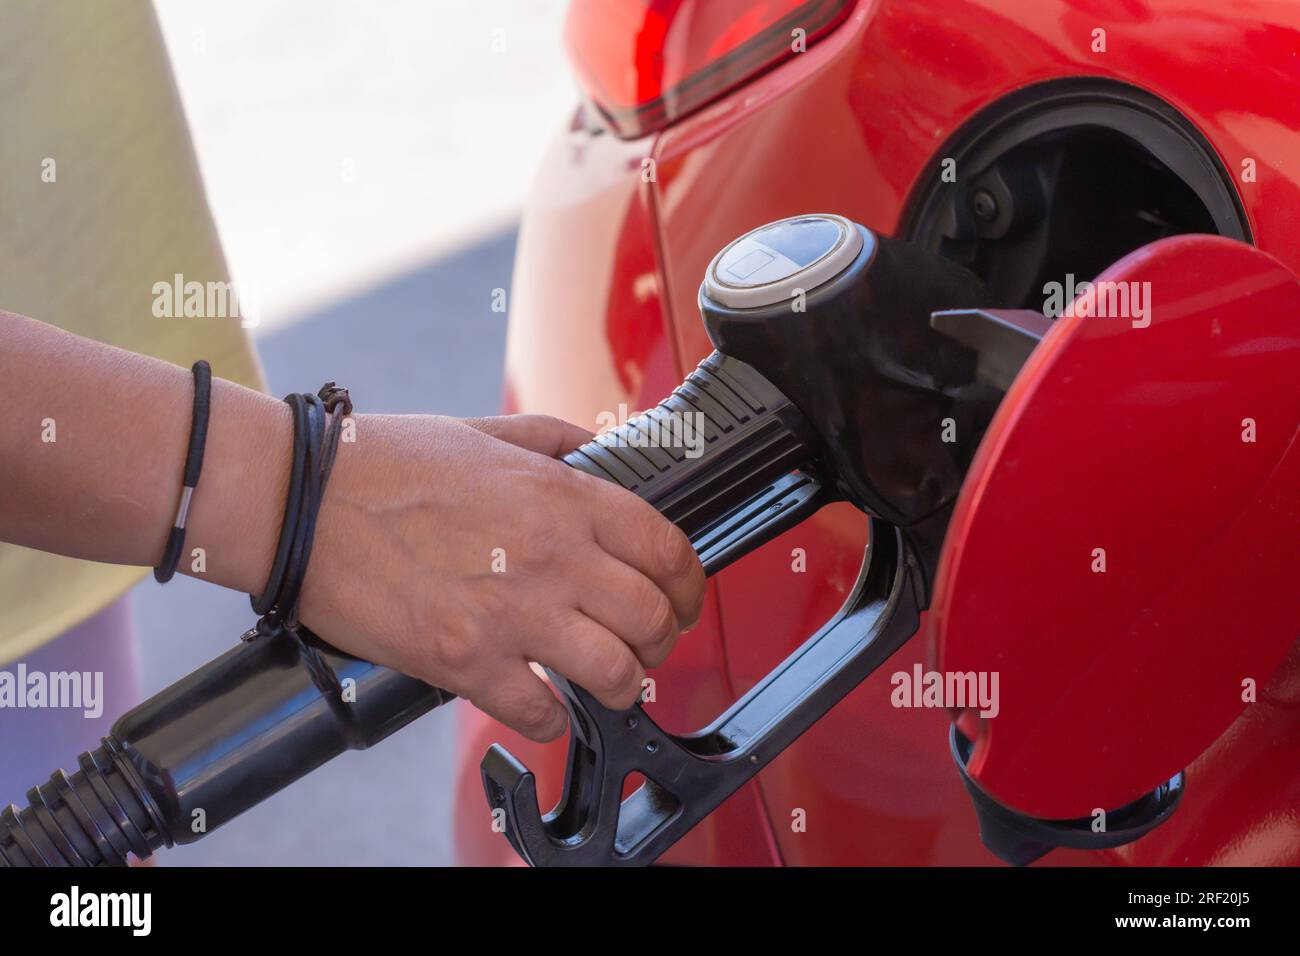 the driver's hand takes the nozzle of the gas pump in the oil tank, refills the fuel gas in the oil tank for self-service during the trip Stock Photo